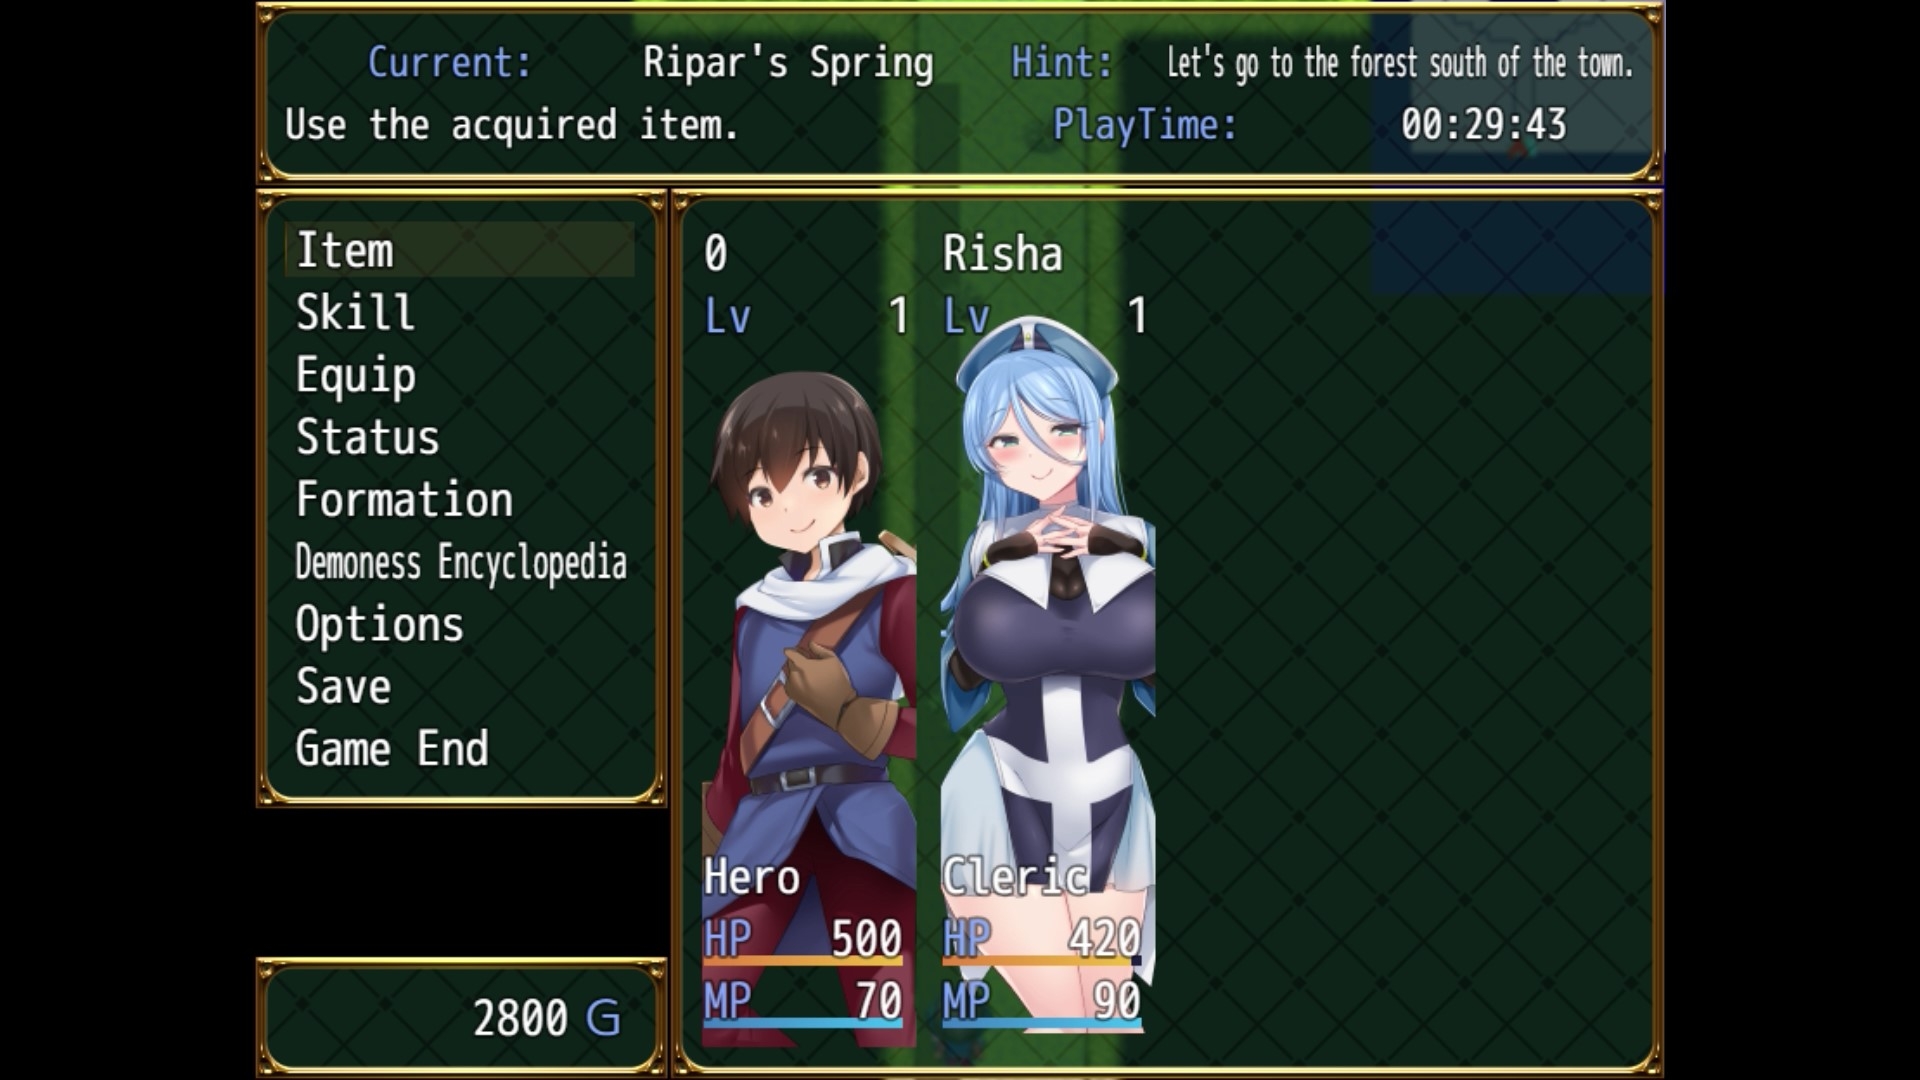 [ENG TL Patch] Horny Hero Quest ~Exploited by enemies and friends alike in this RPG~